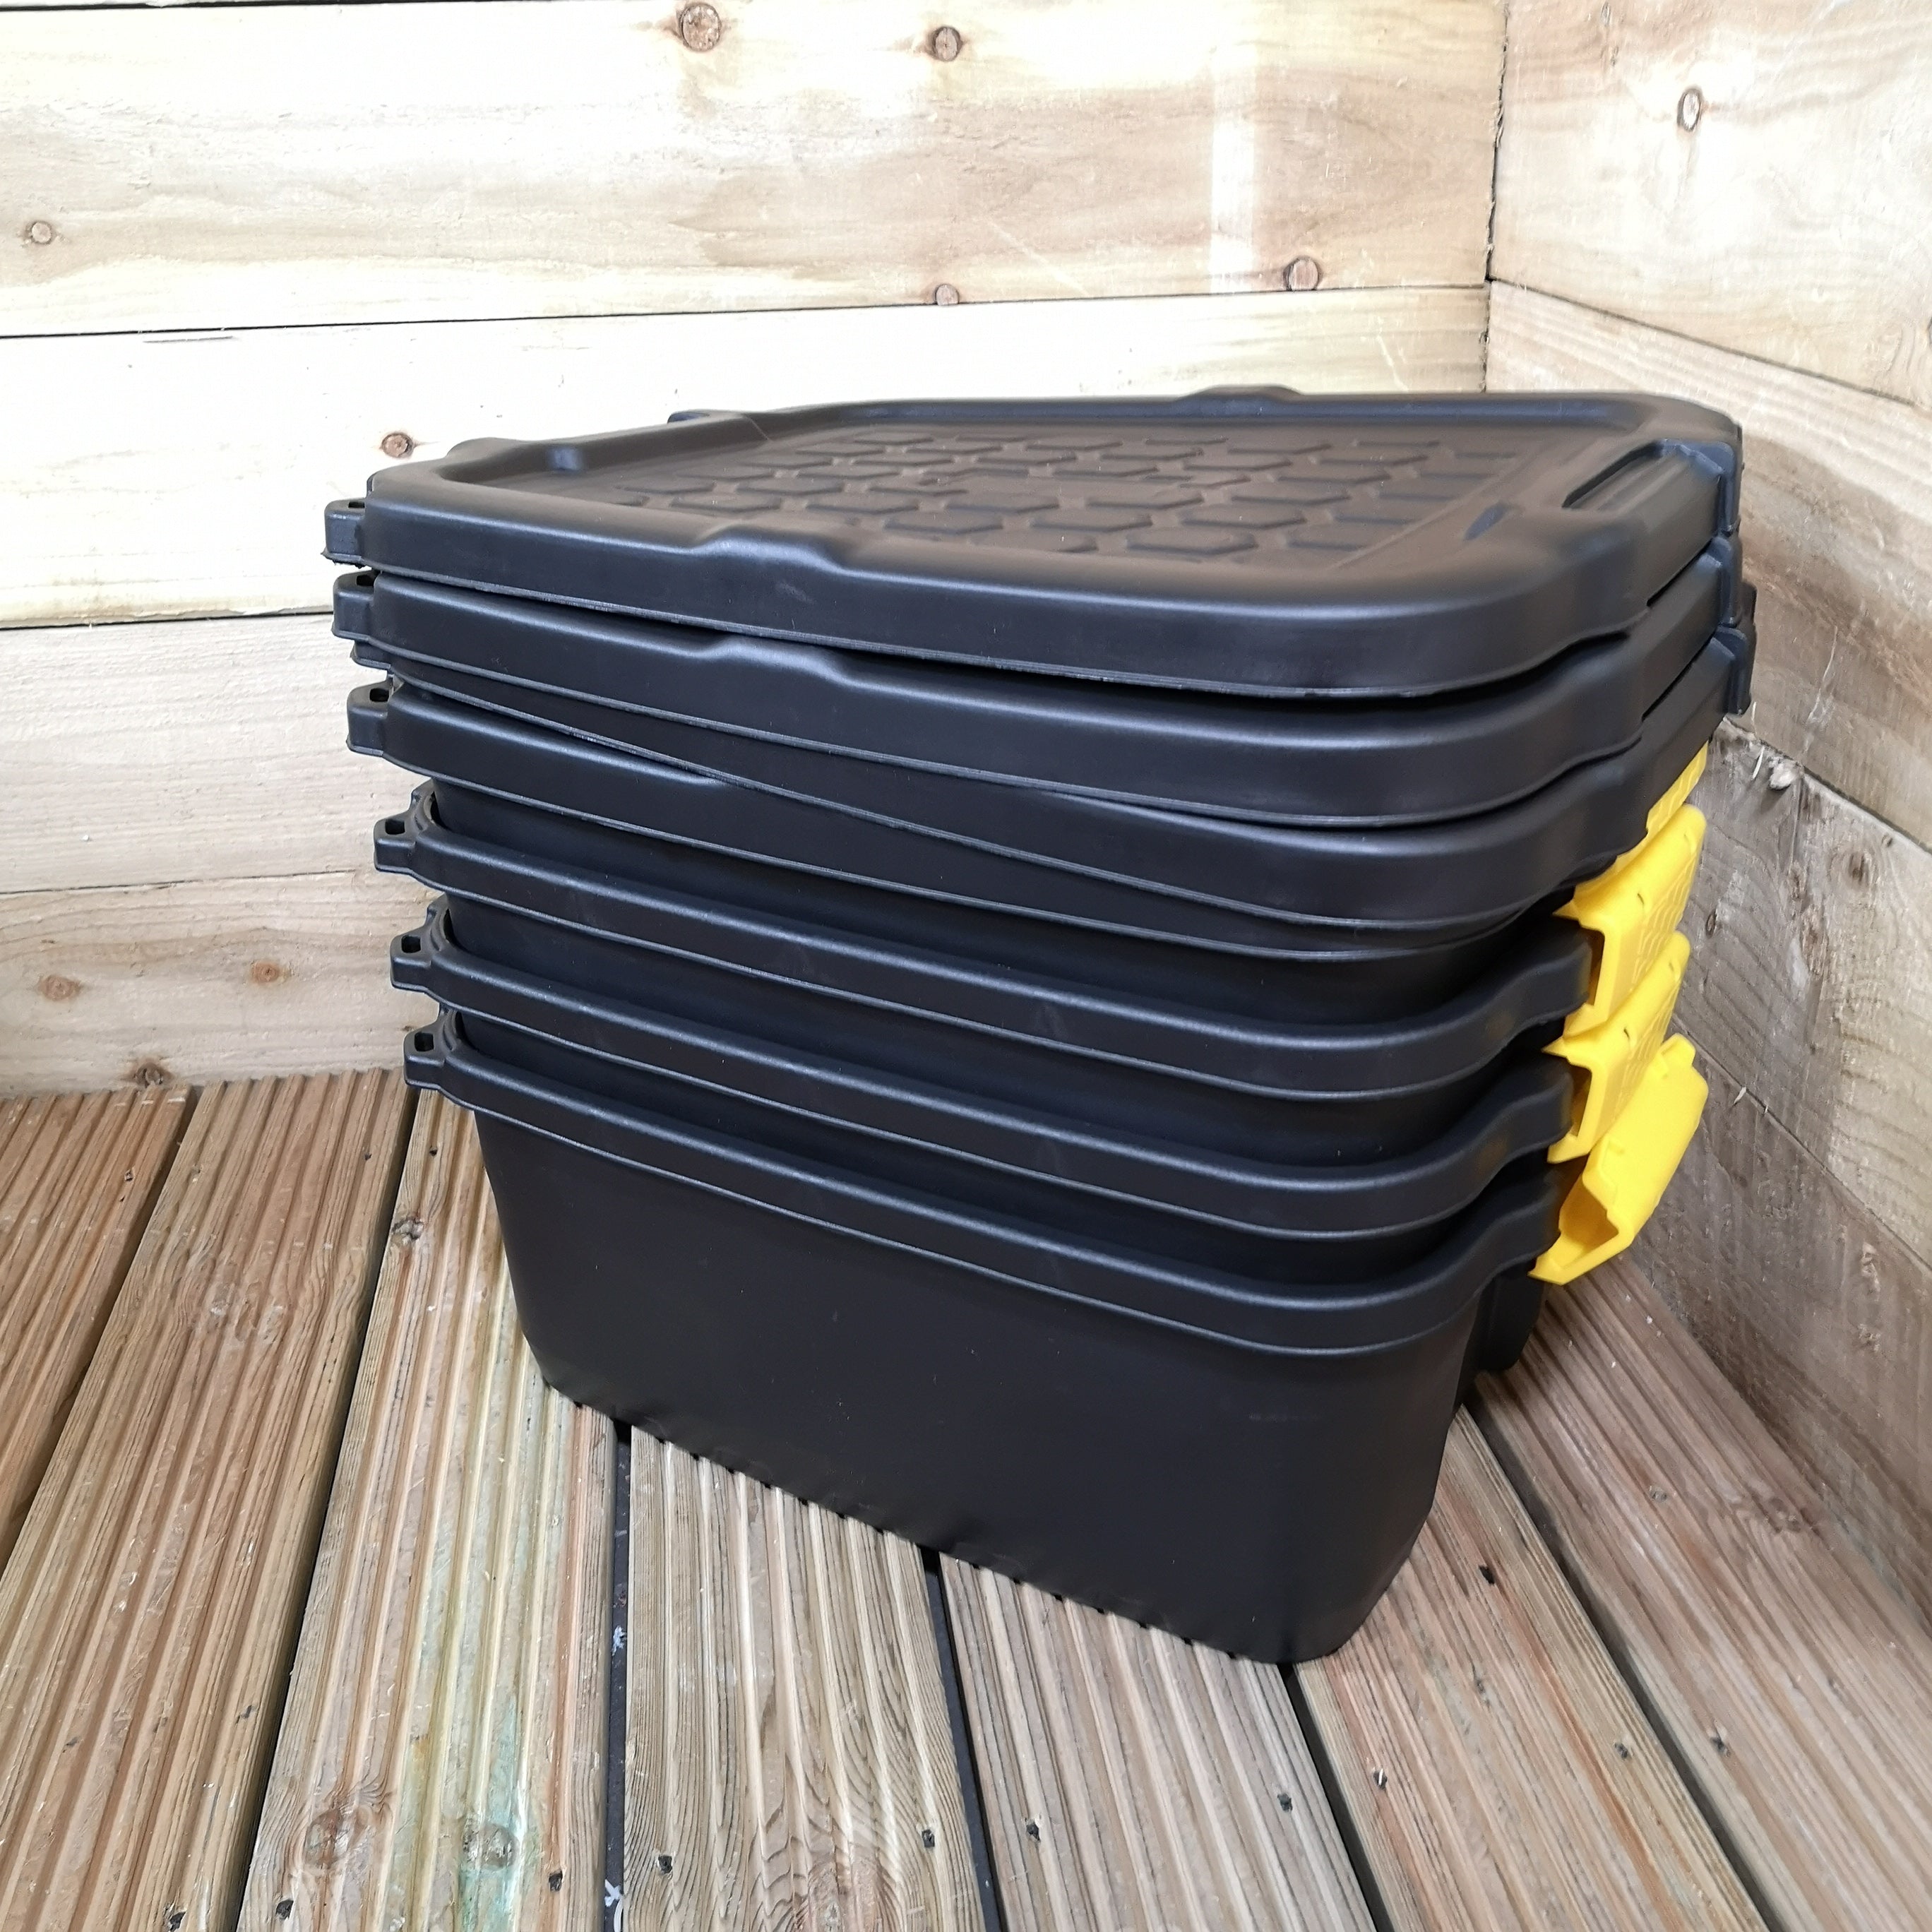 4 x 24L Heavy Duty Storage Boxes, Sturdy, Lockable, Stackable and Nestable Design Storage Chests with Clips in Black